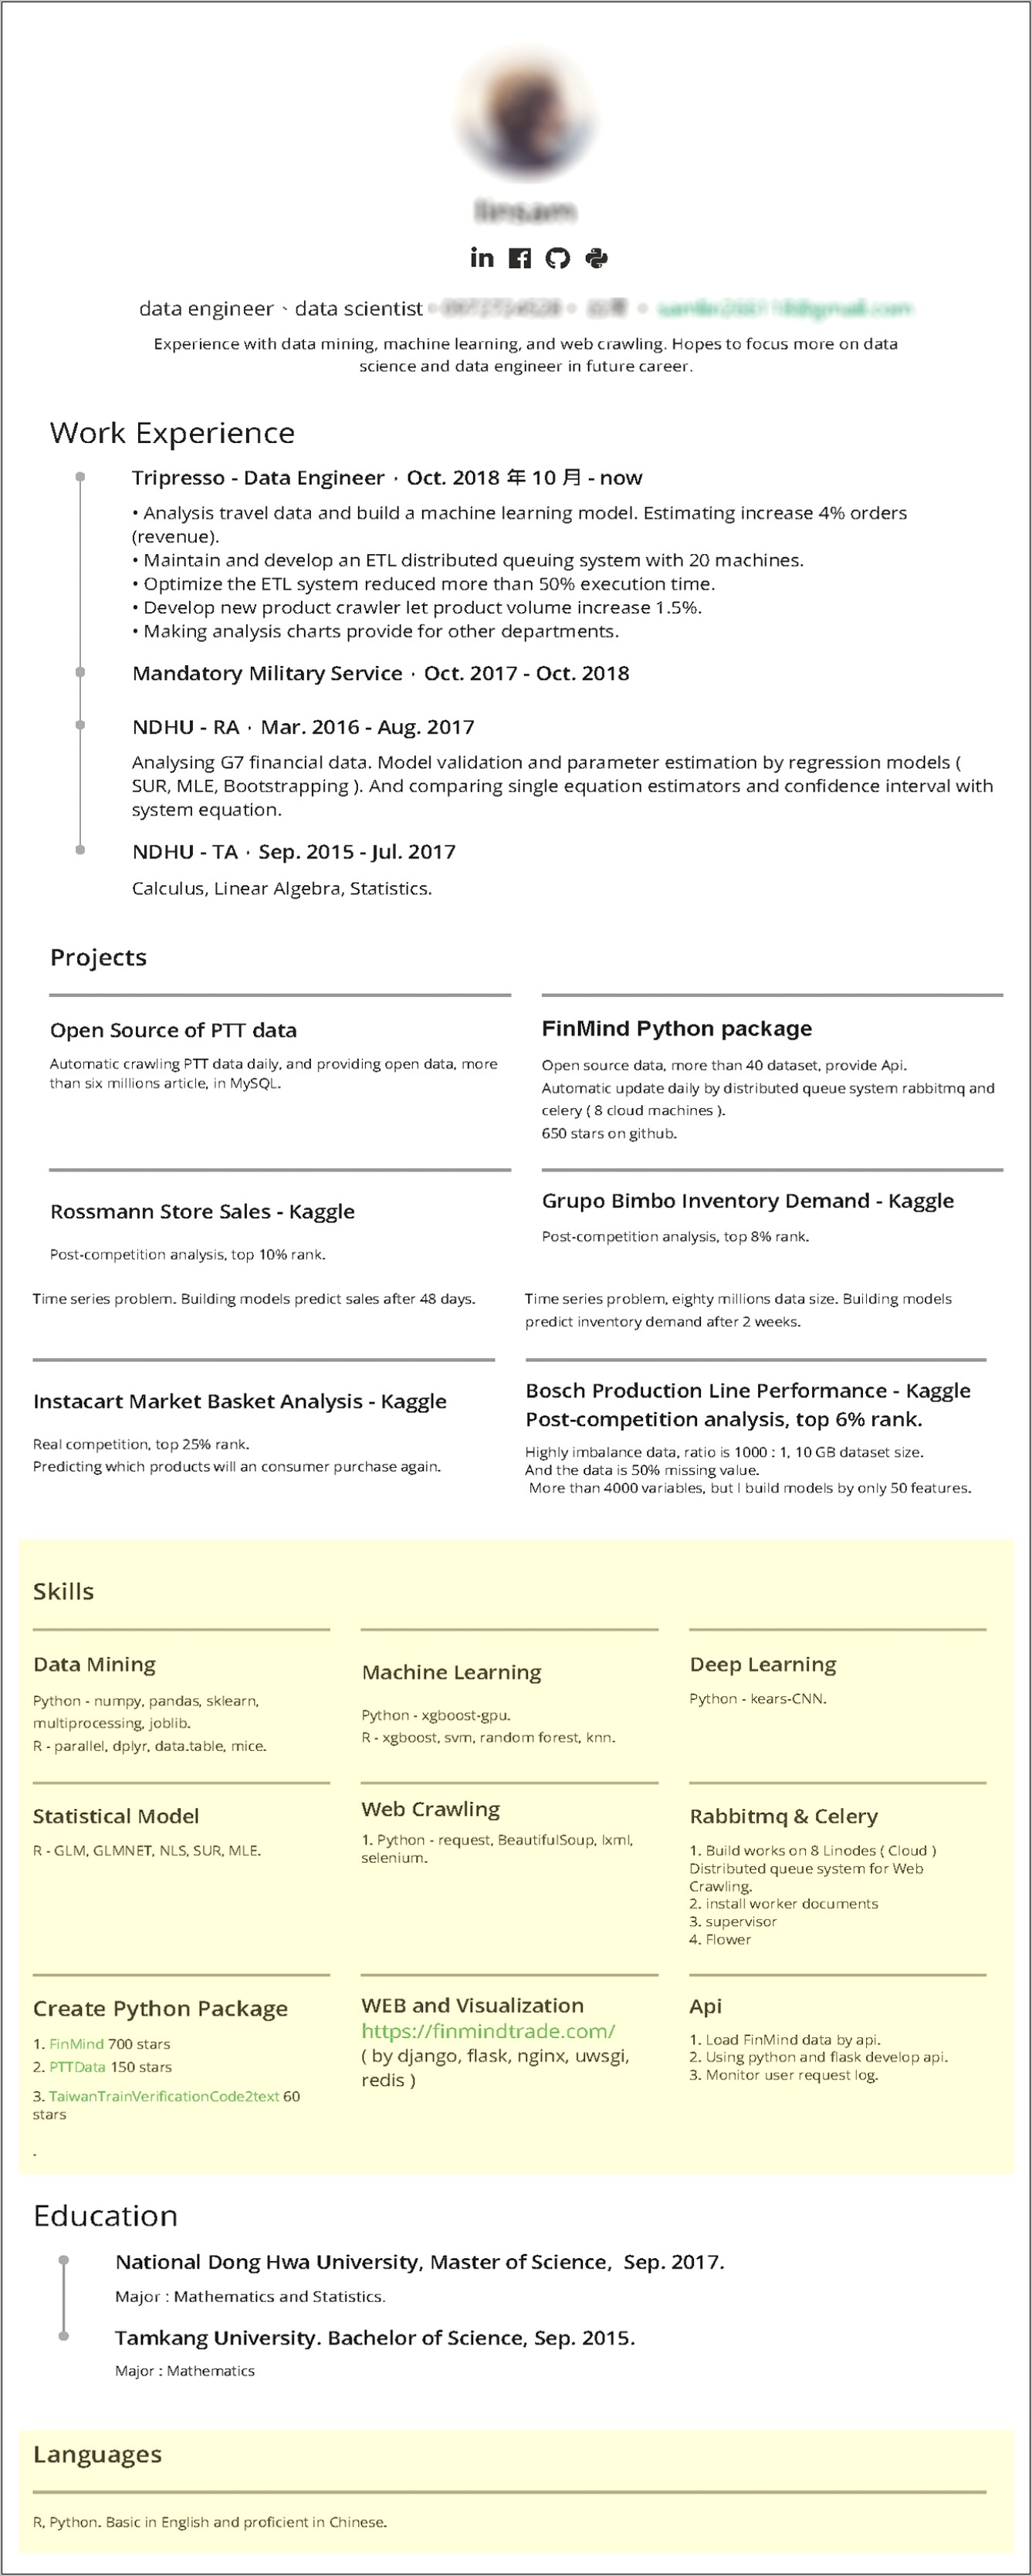 Python Comes Under Which Skill In Resume